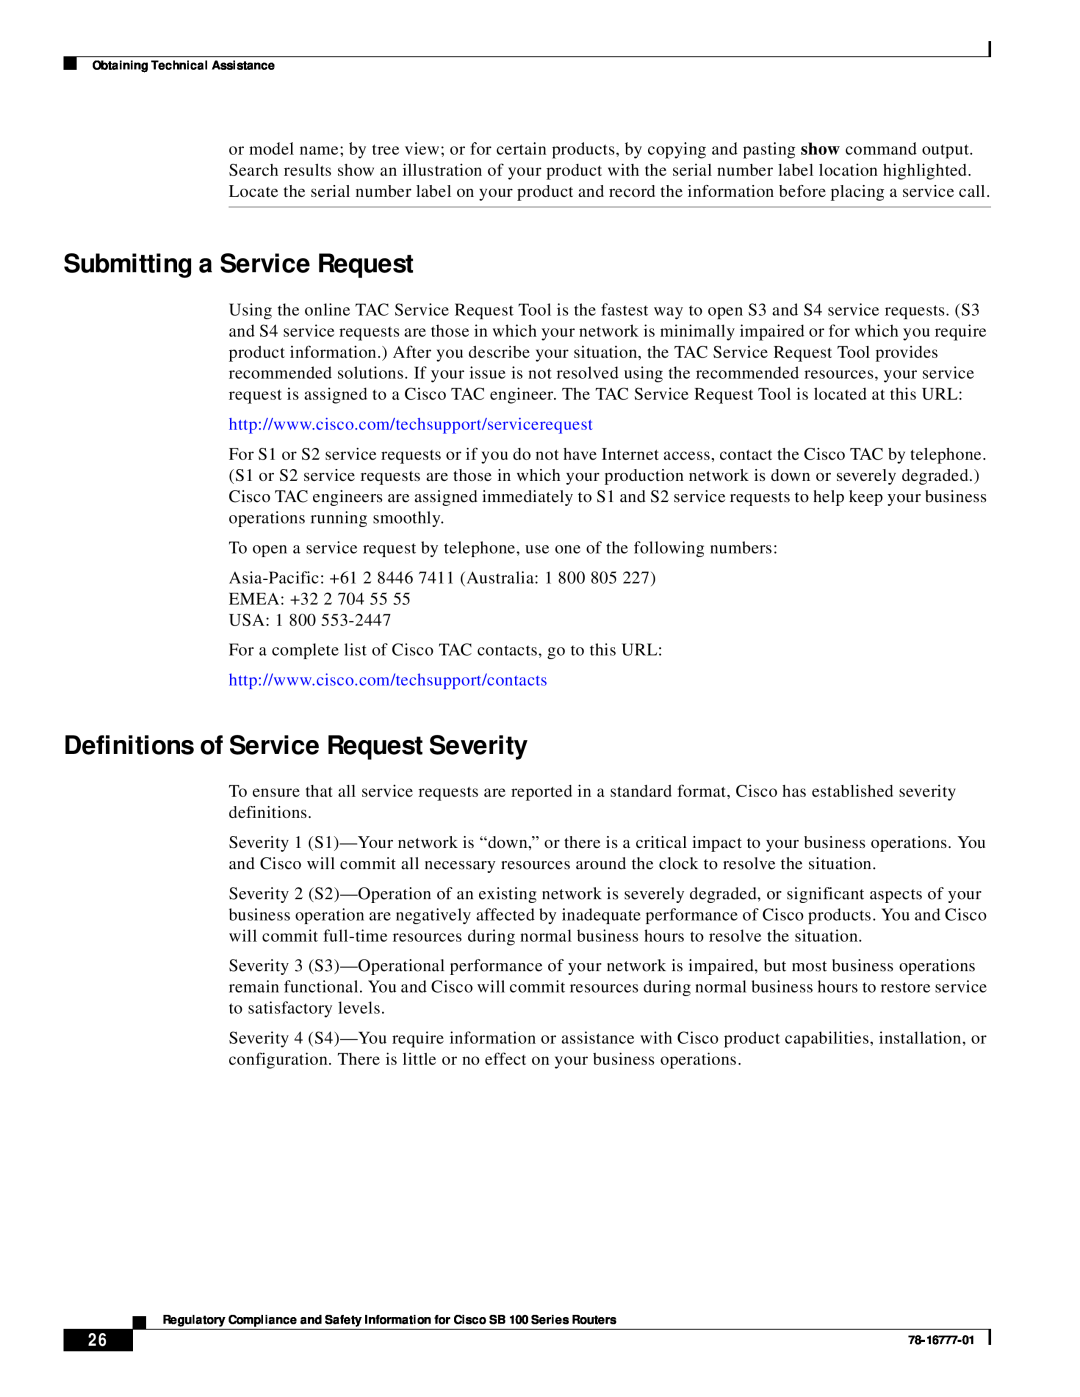 Cisco Systems SB 100 Series manual Submitting a Service Request, Definitions of Service Request Severity 